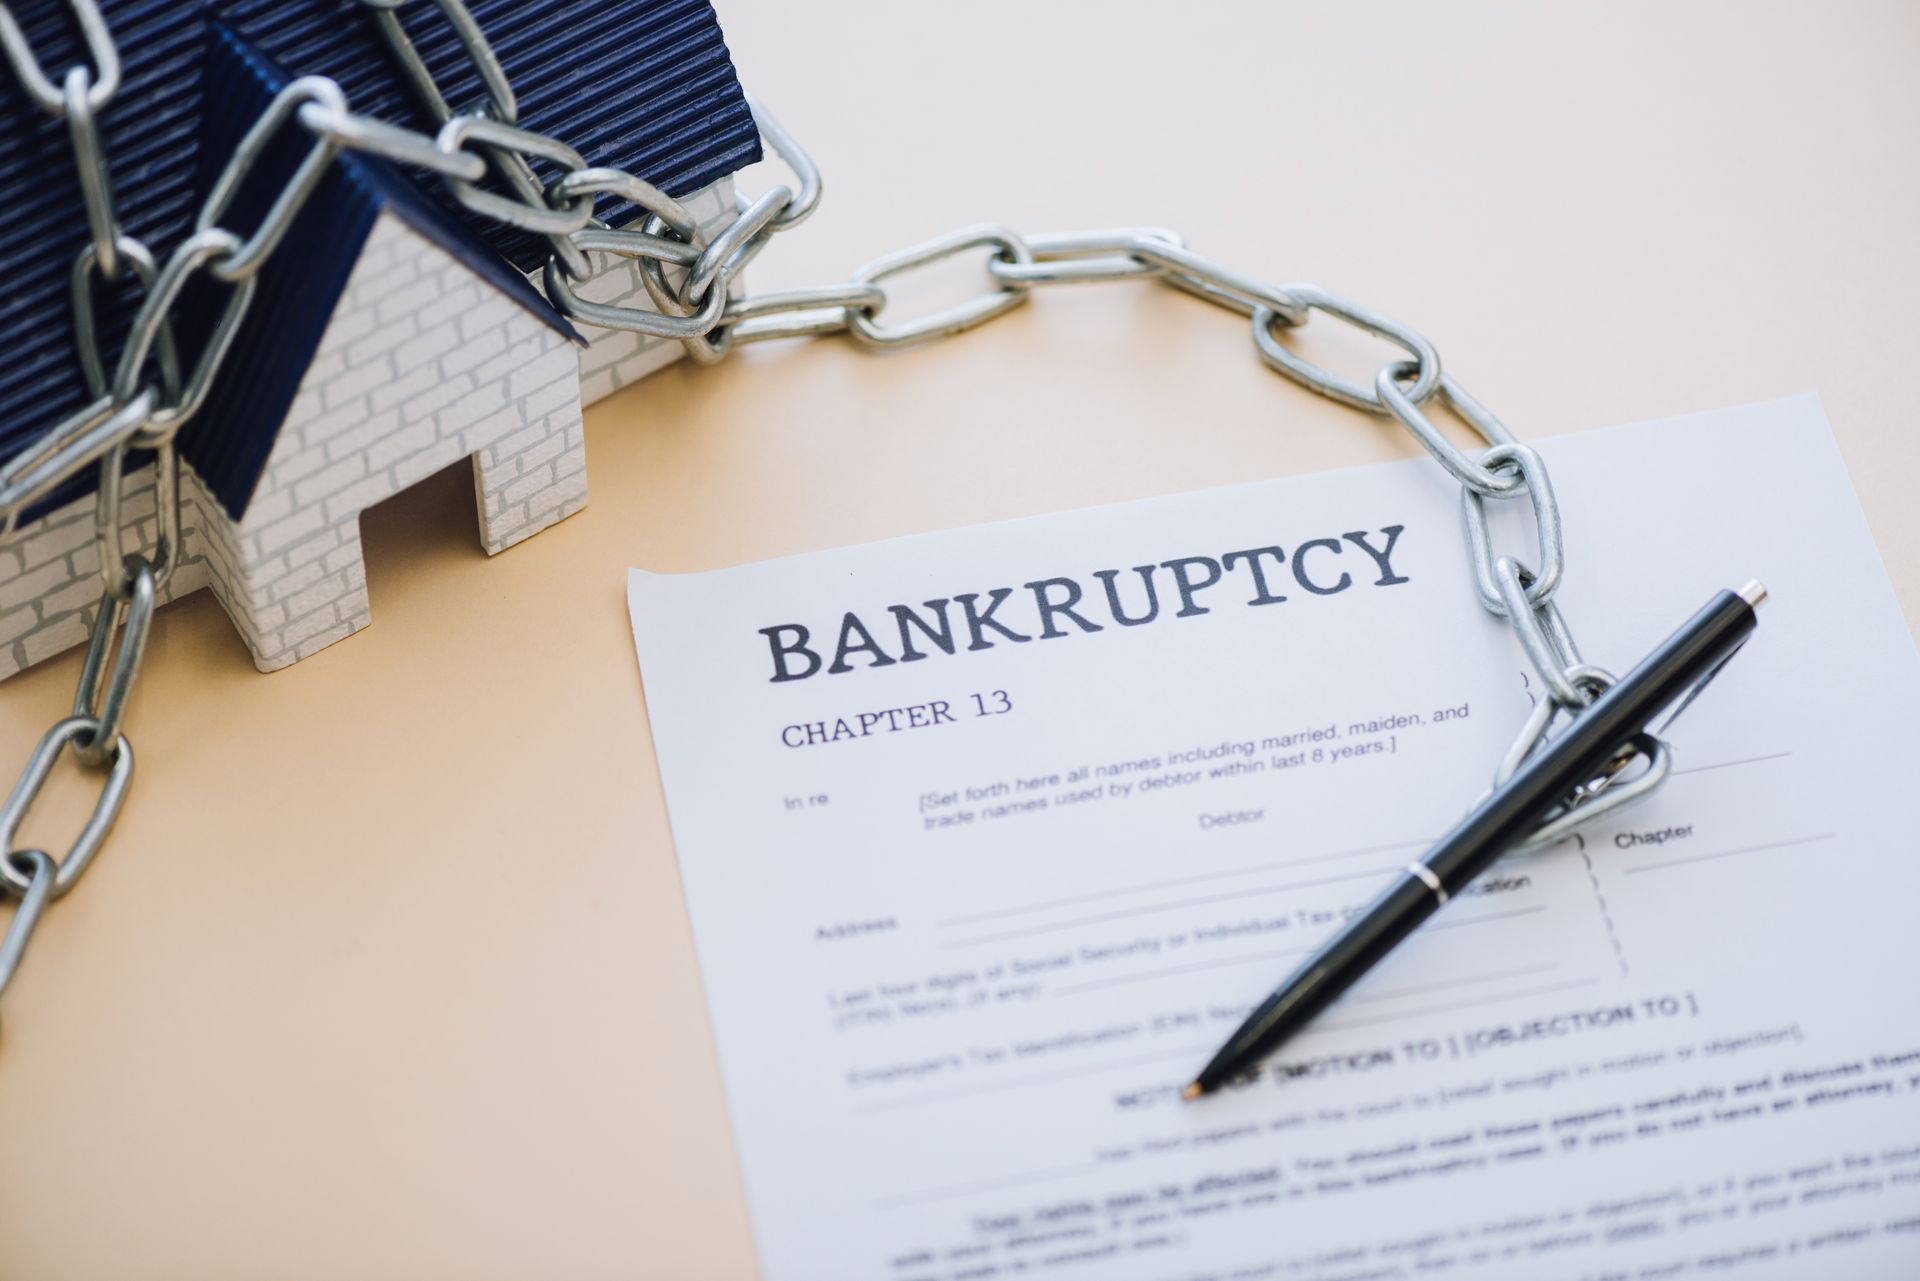 Chapter 13 bankruptcy form